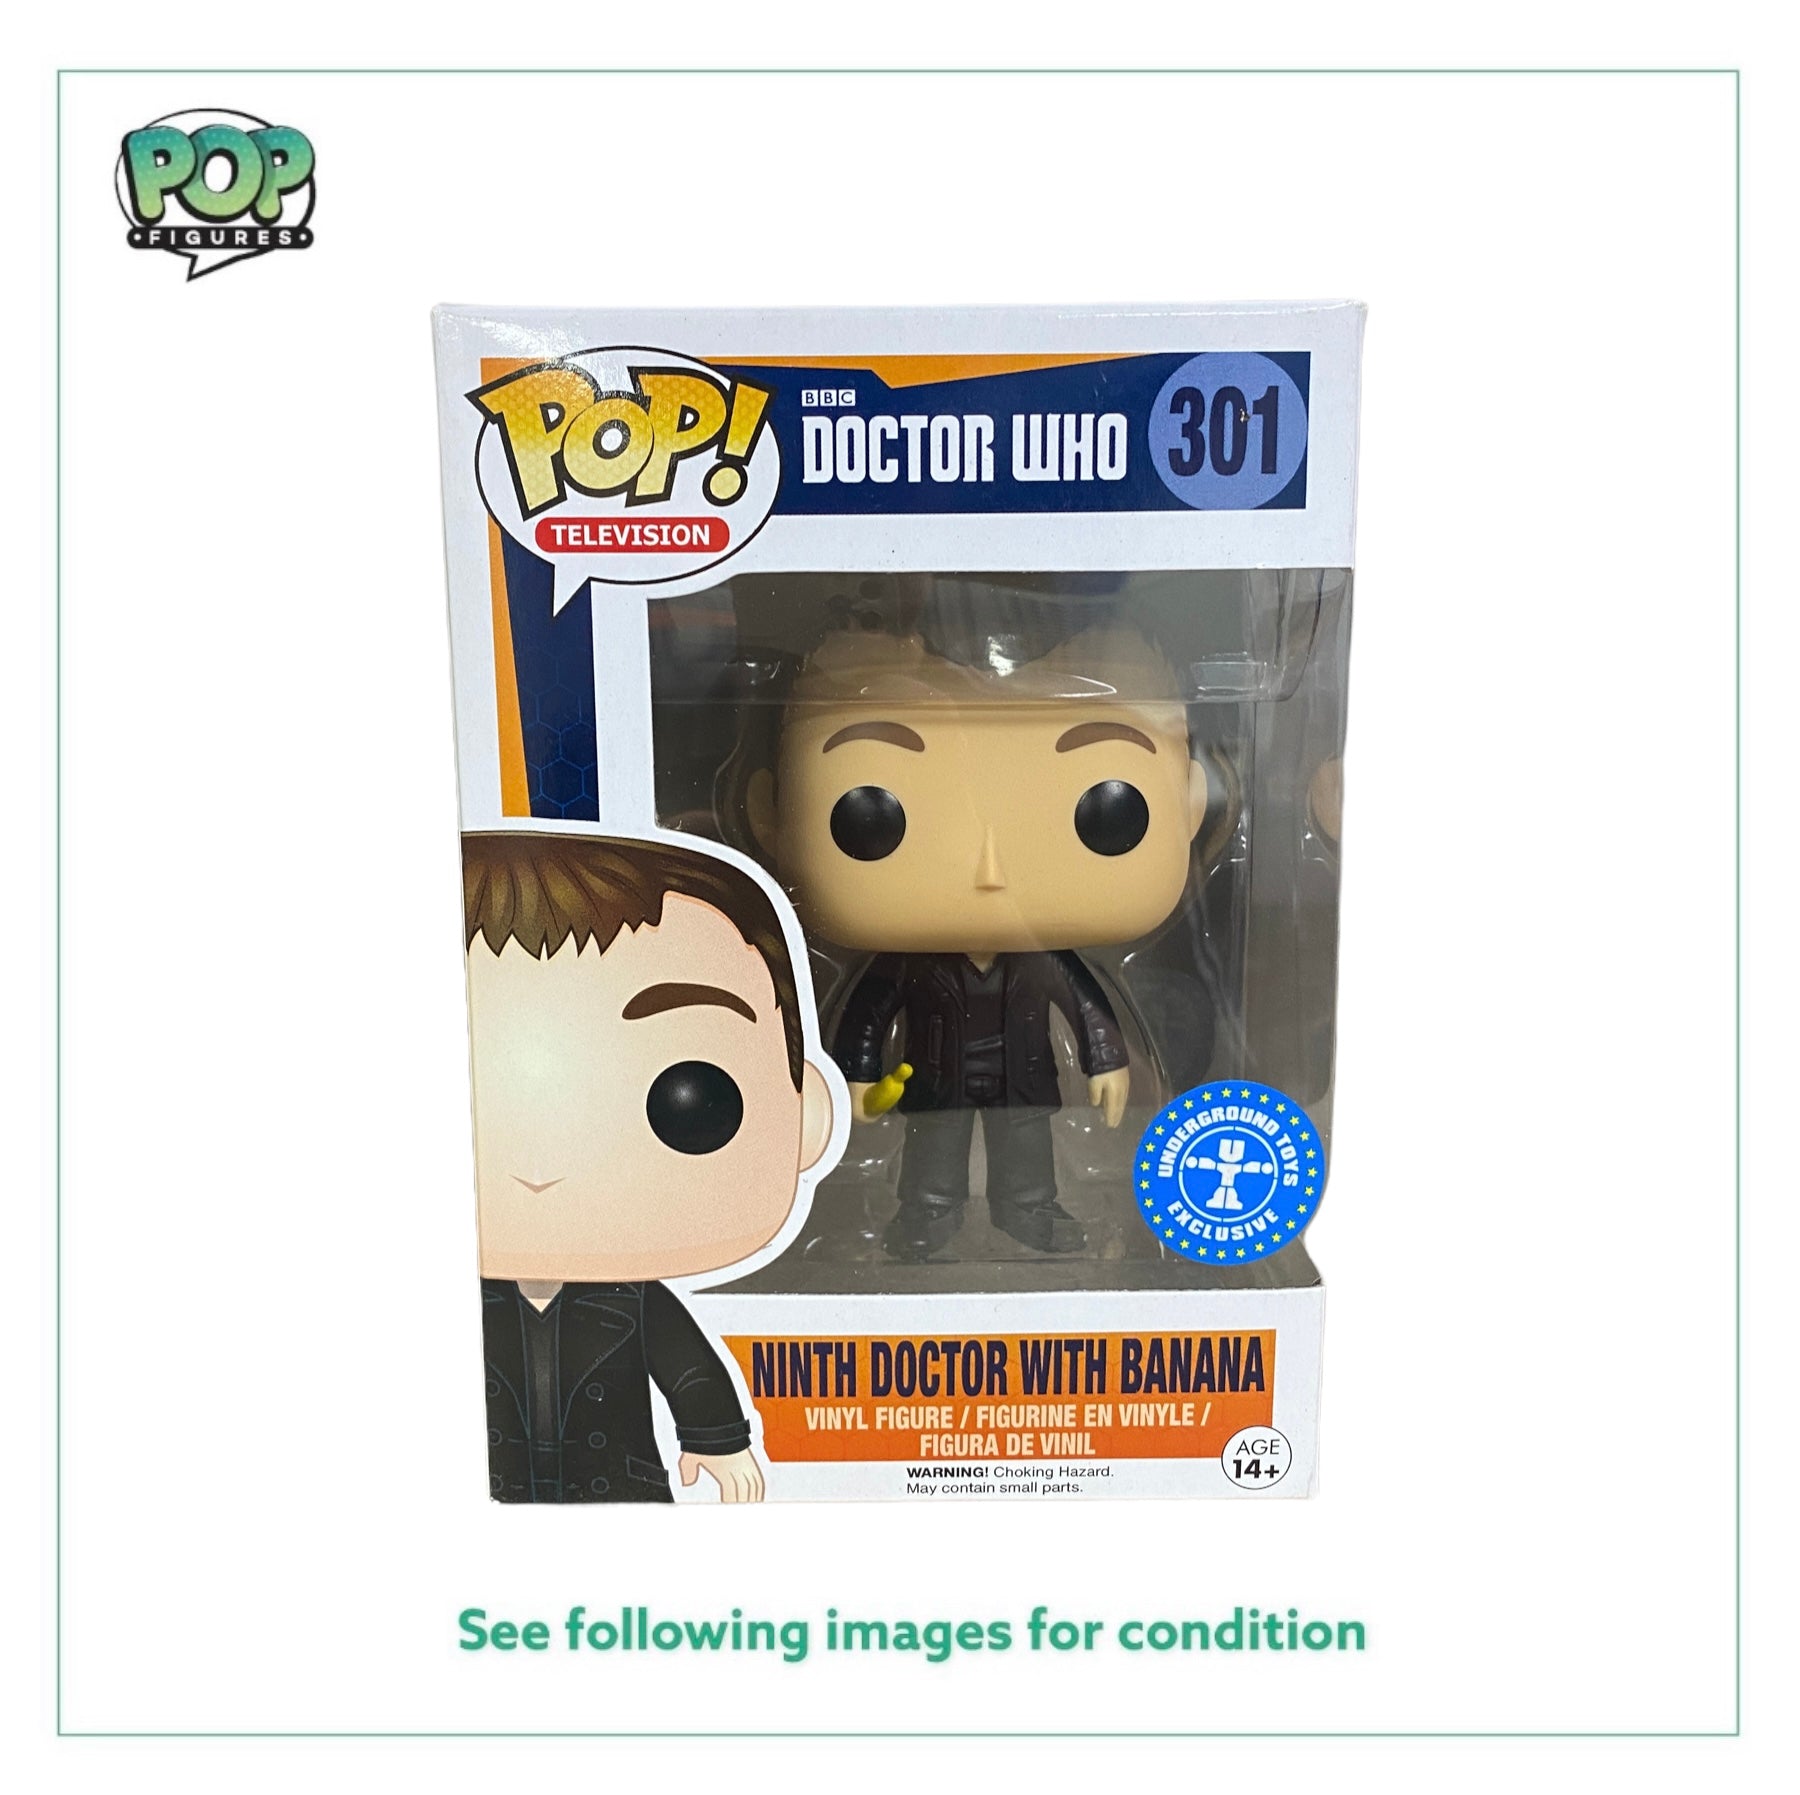 Ninth Doctor With Banana #301 Funko Pop! - Doctor Who - 2015 Pop! - Underground Toys Exclusive - Condition 9.5/10